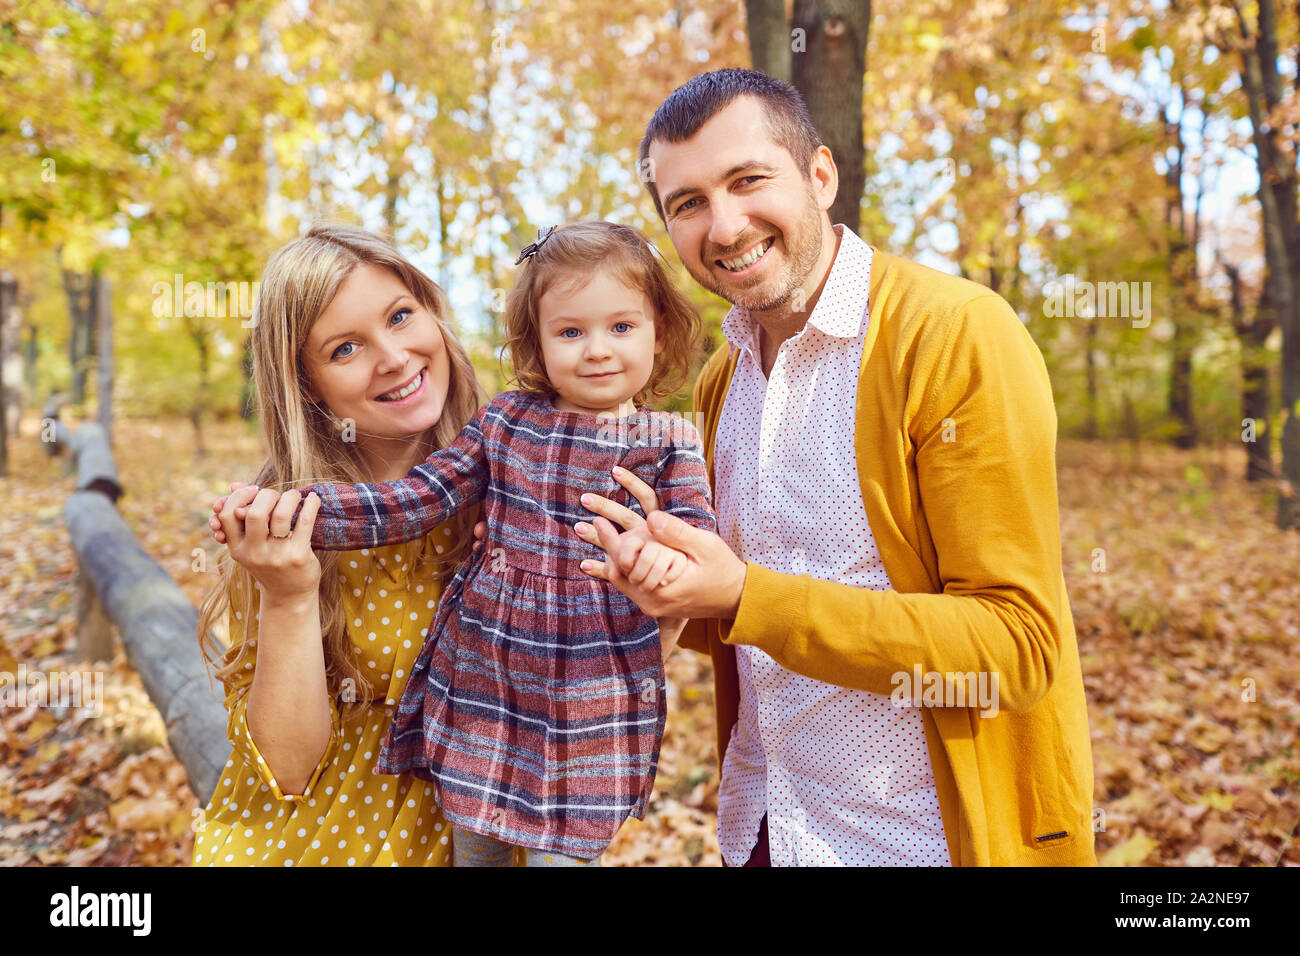 Family playing with baby in the park in autumn. Stock Photo